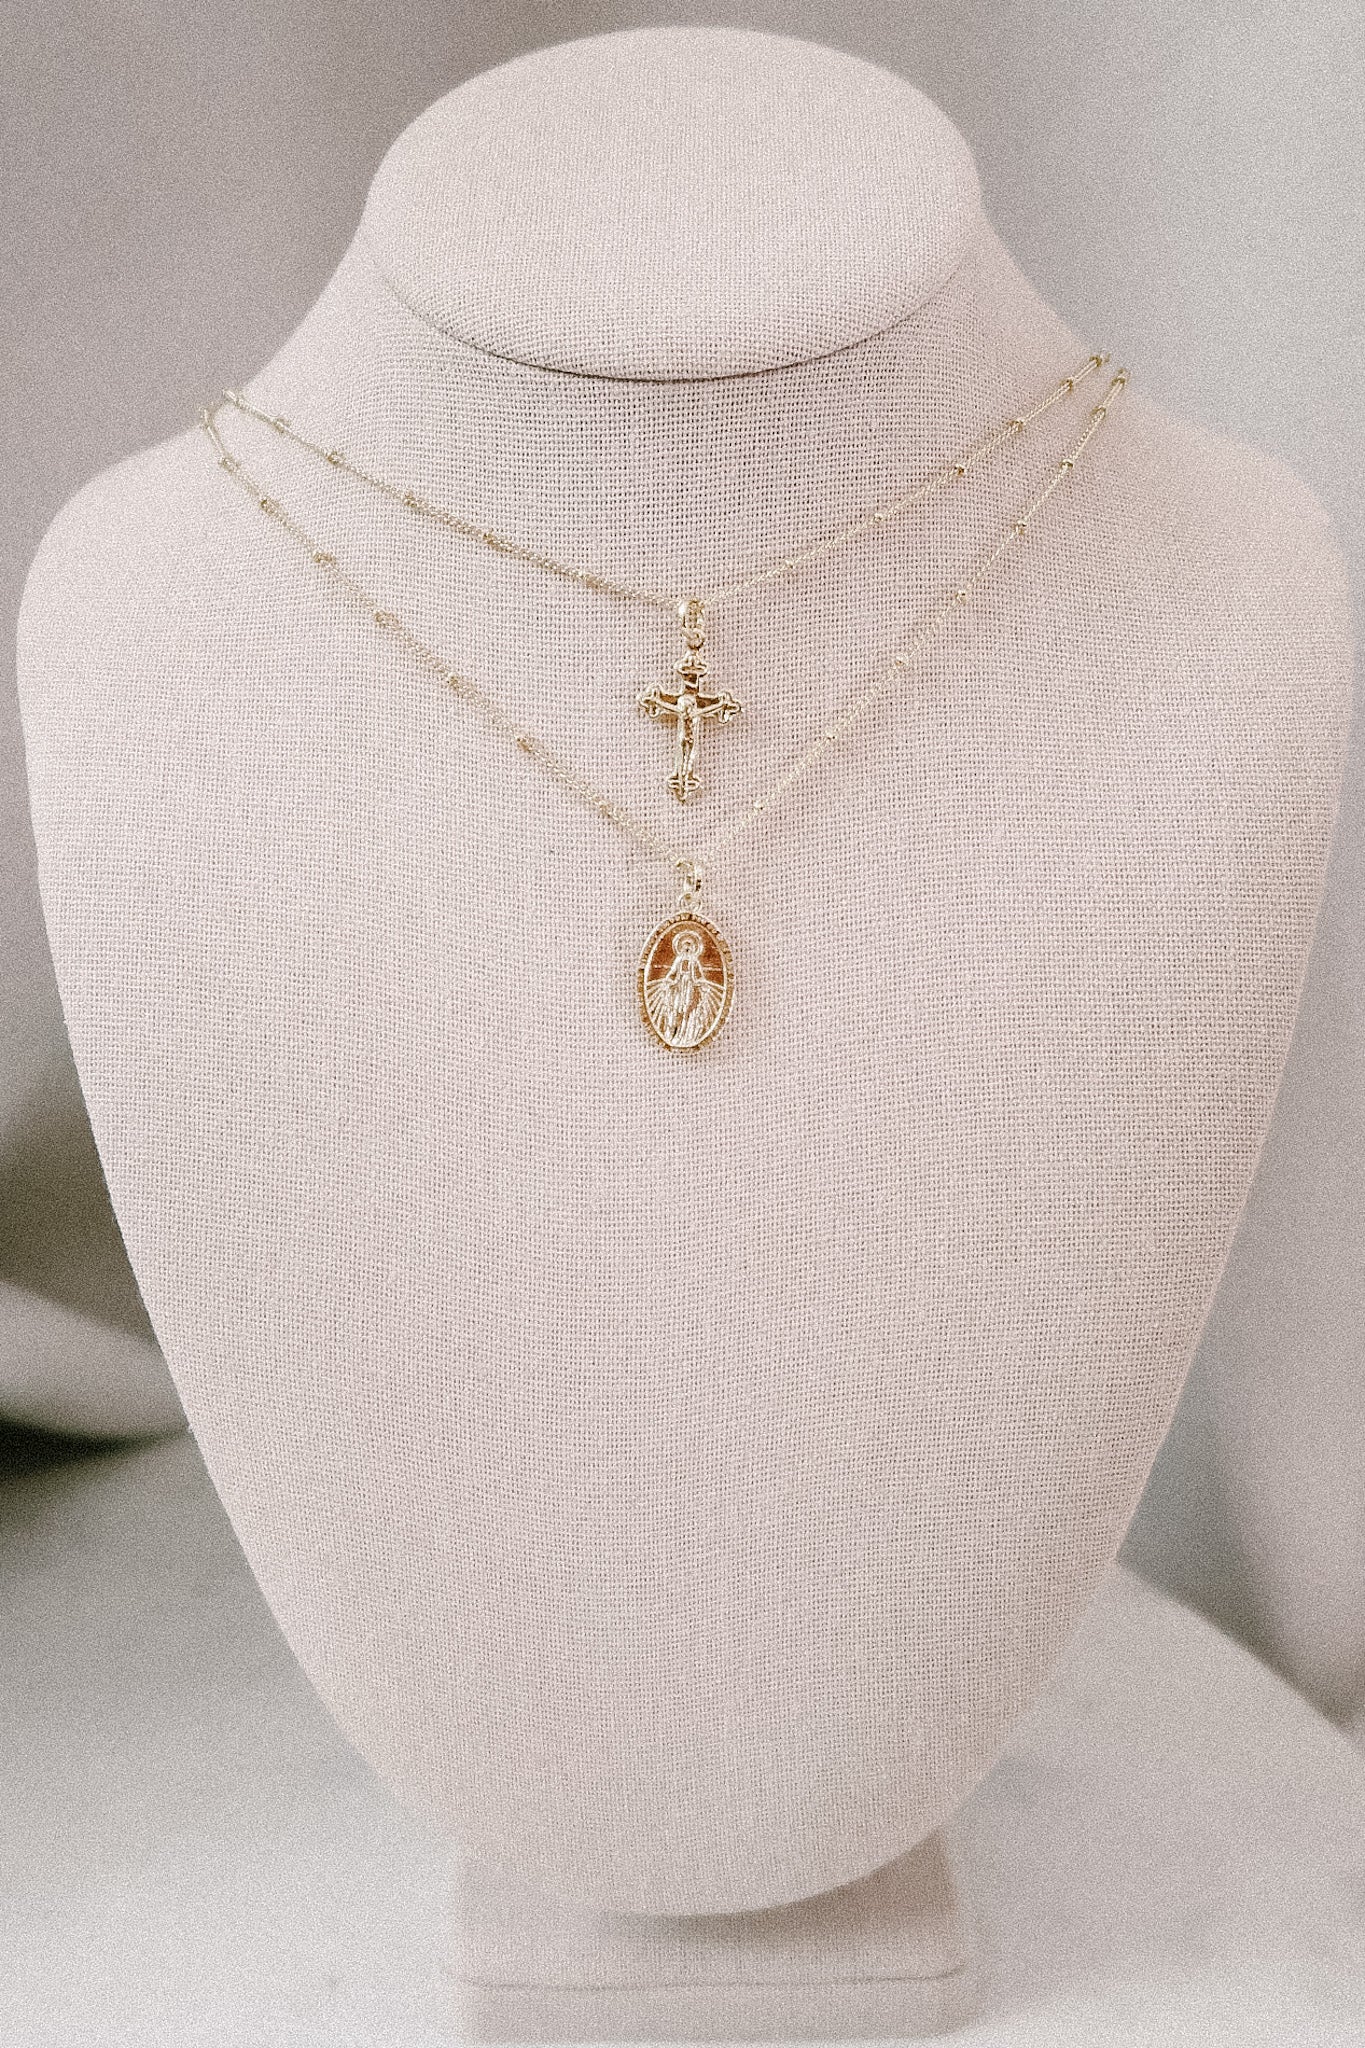 Miraculous Medal + Crucifix Layered Gold Filled Satellite Chain Necklace